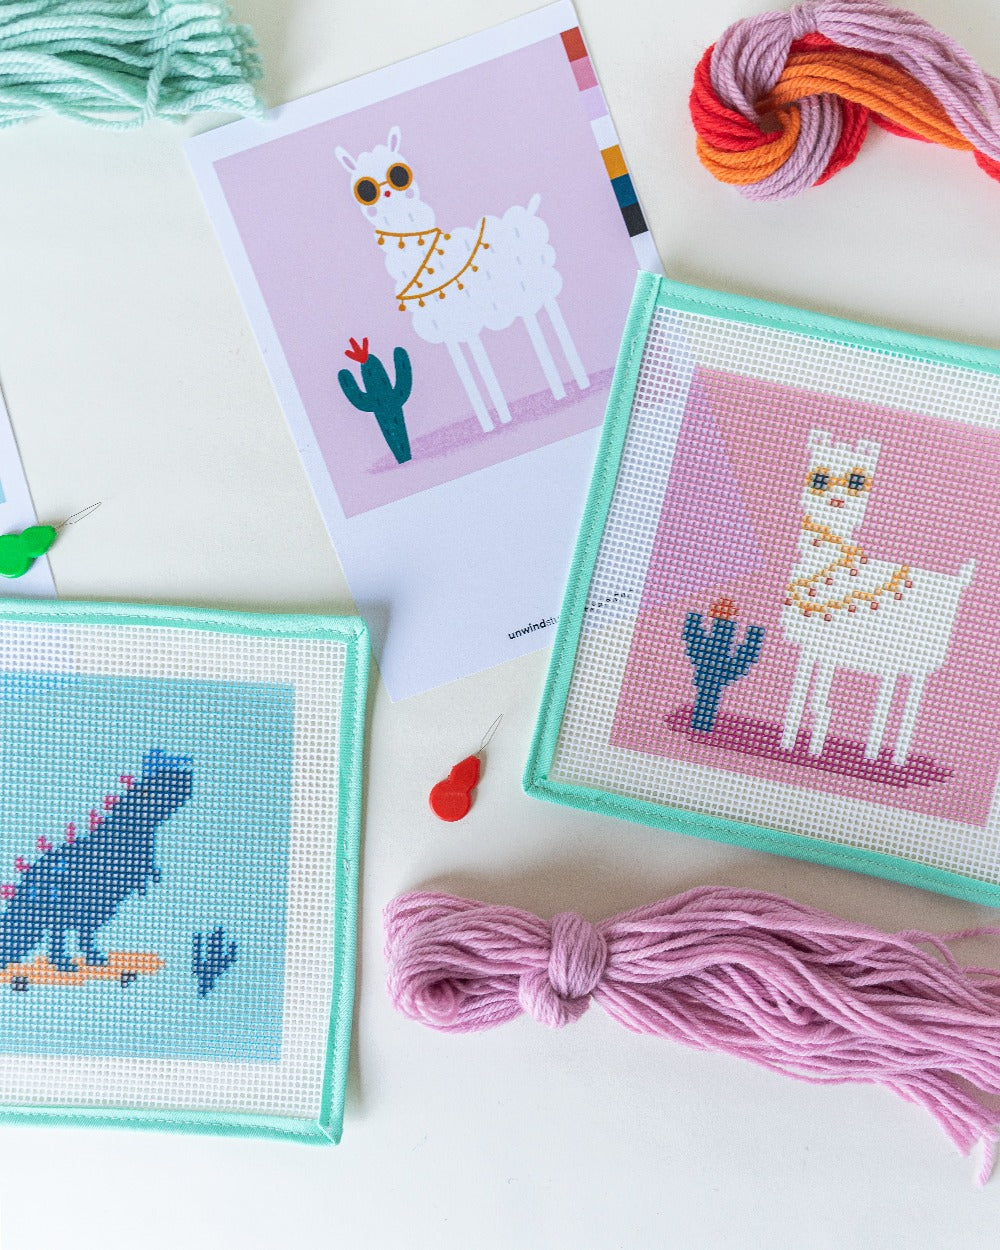 A beginner needlepoint kit for kids and adults who are learning to